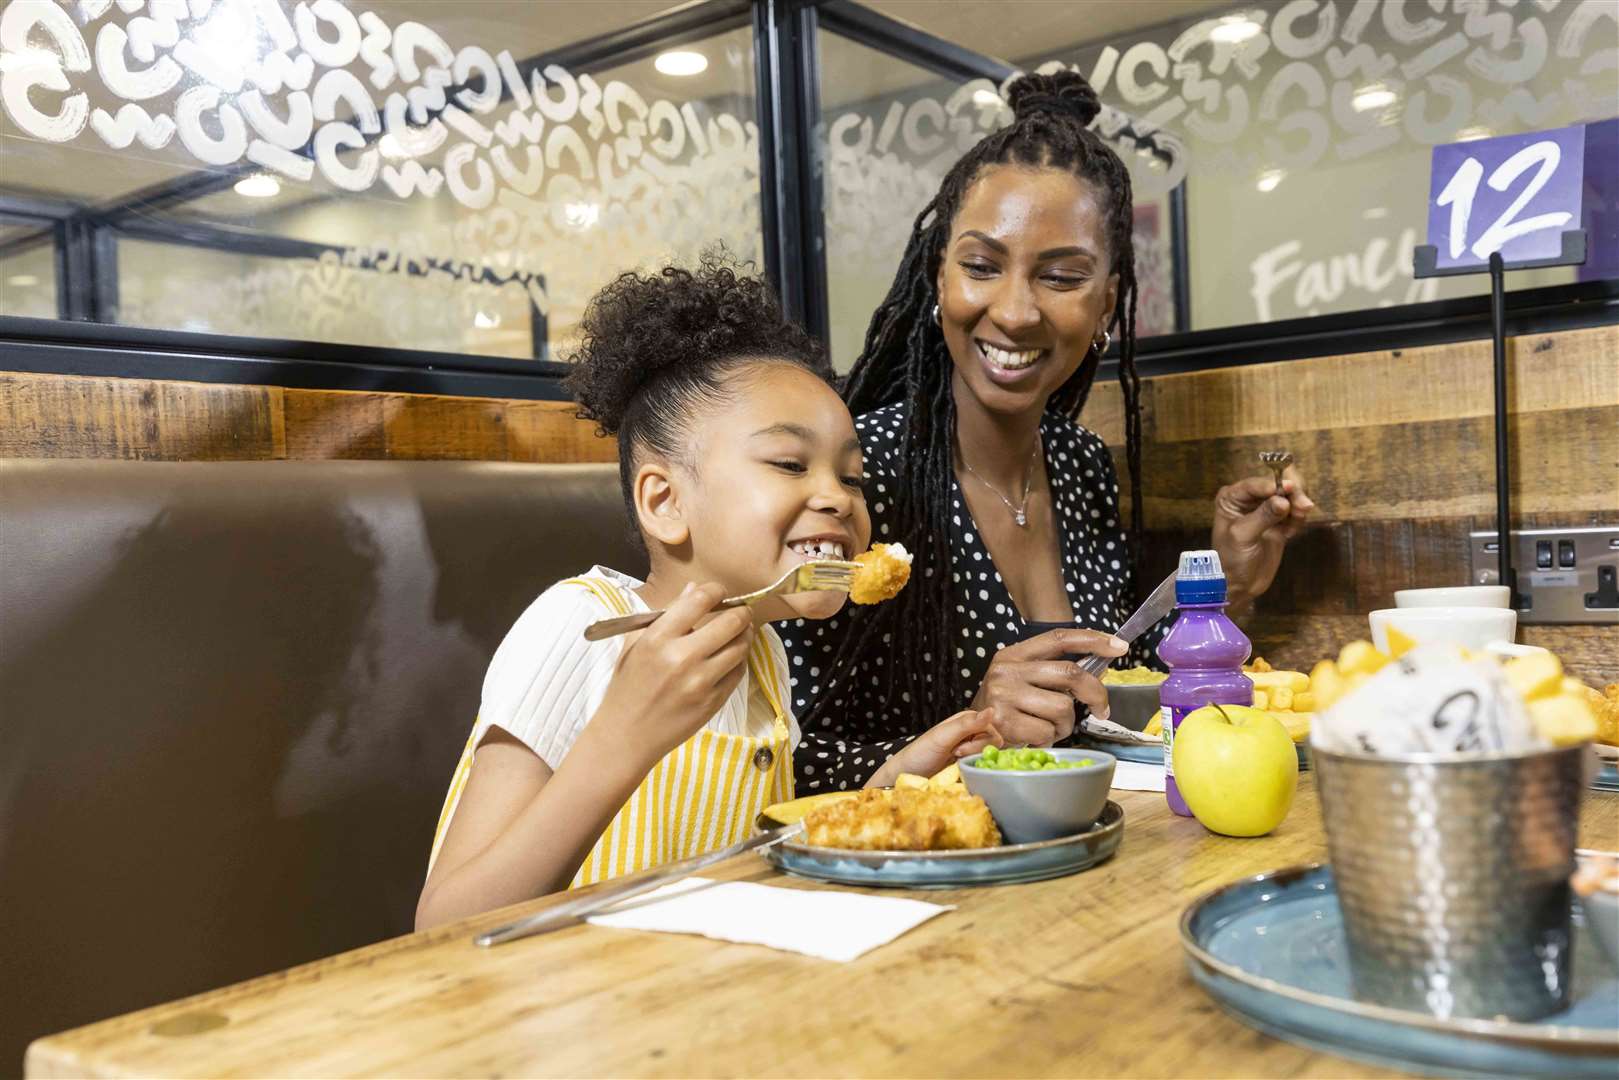 We've rounded up all the kids eat free or £1 deals you can claim during half term